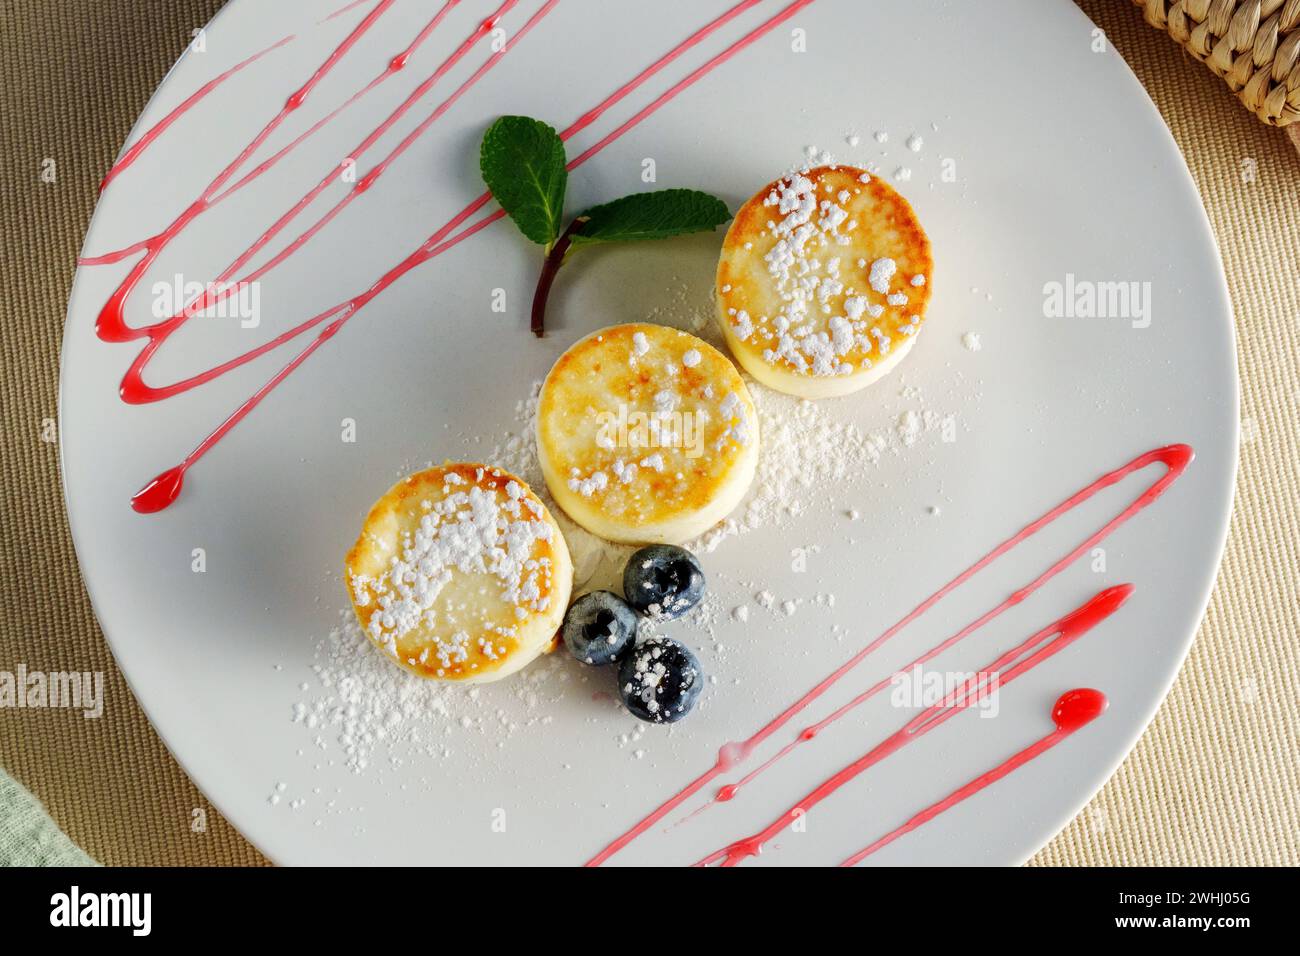 Sweet Symphony: A Trio of Tempting Treats on a White Platter Stock Photo